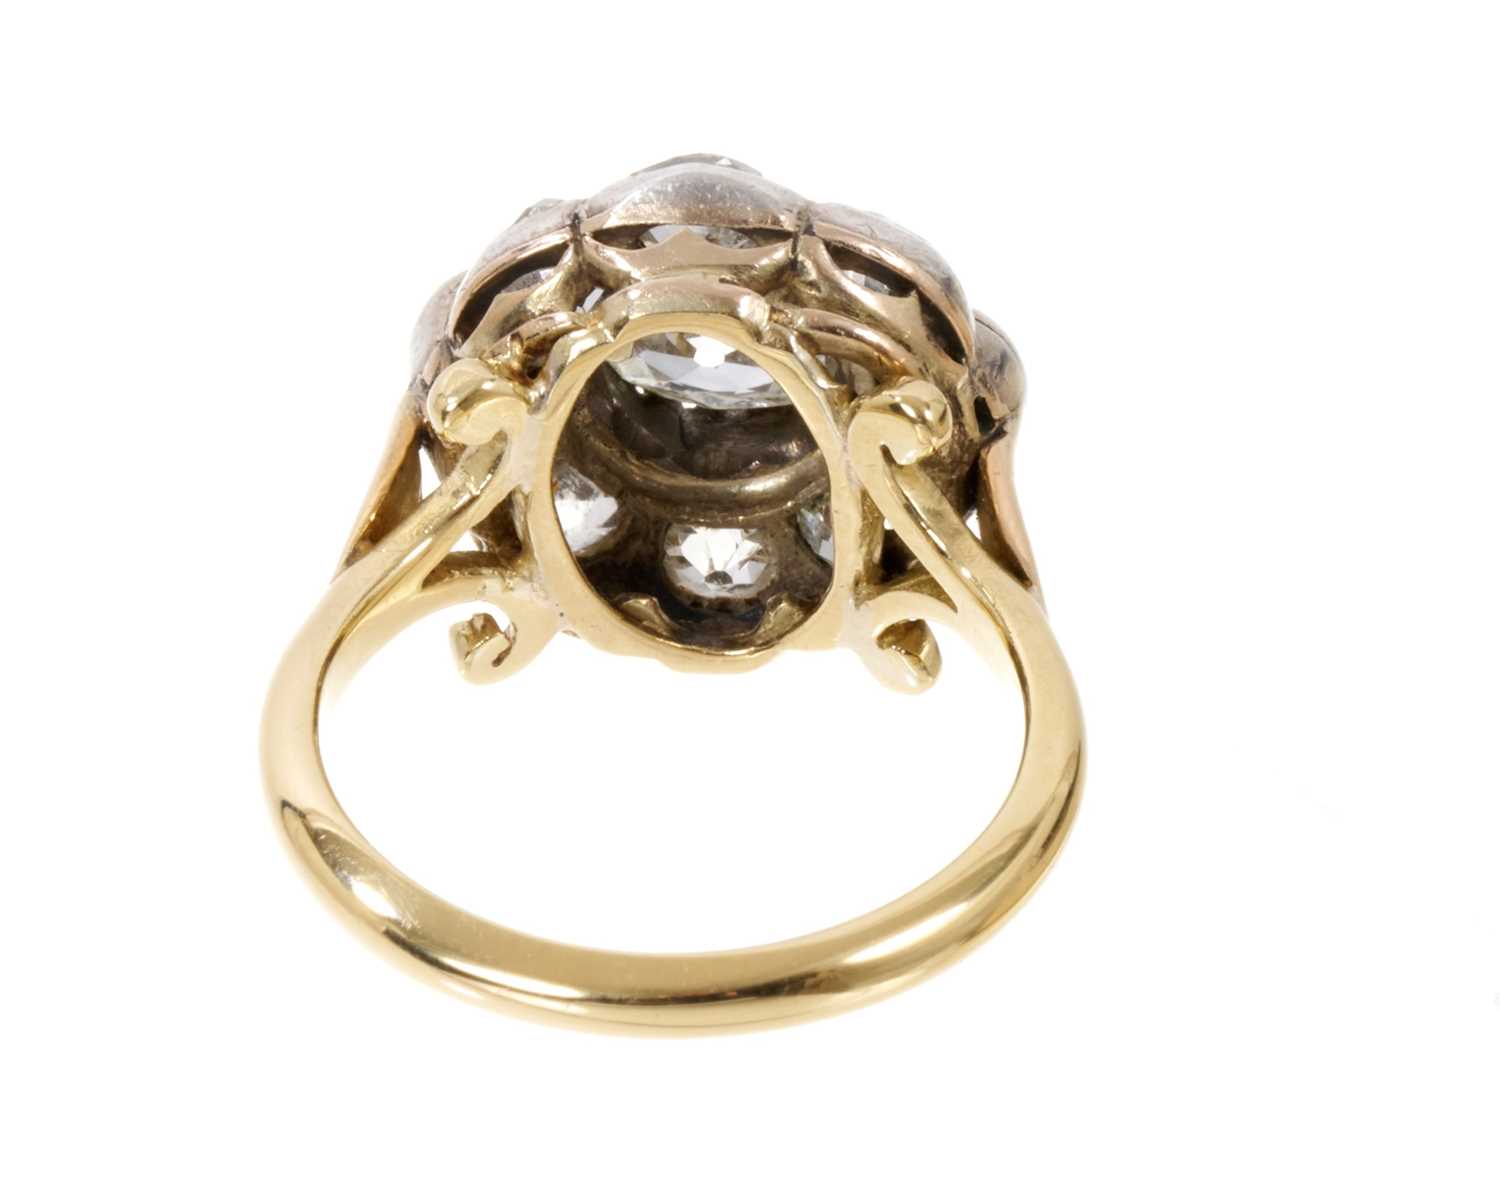 Antique diamond cluster ring - Image 3 of 3